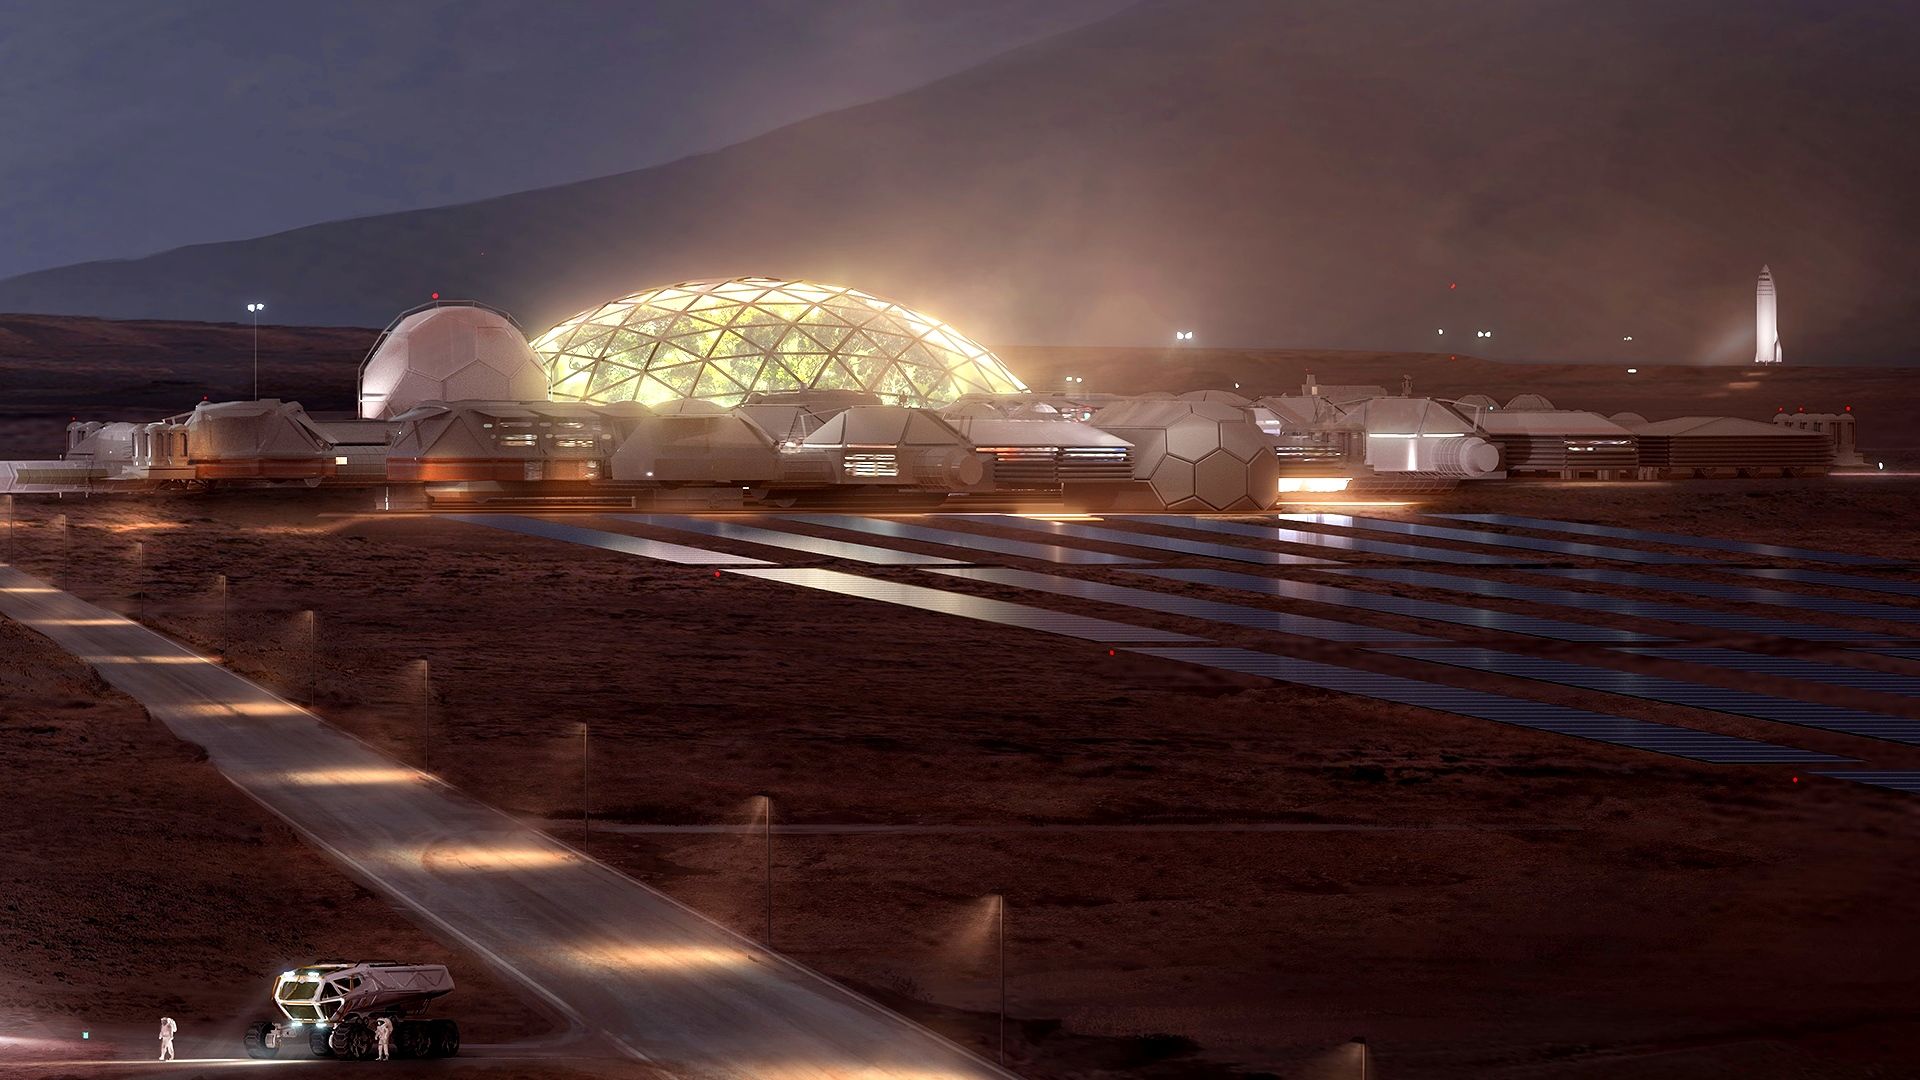 The FINANCIAL musk says first 300 visitors 'will probably die' in Martian colony